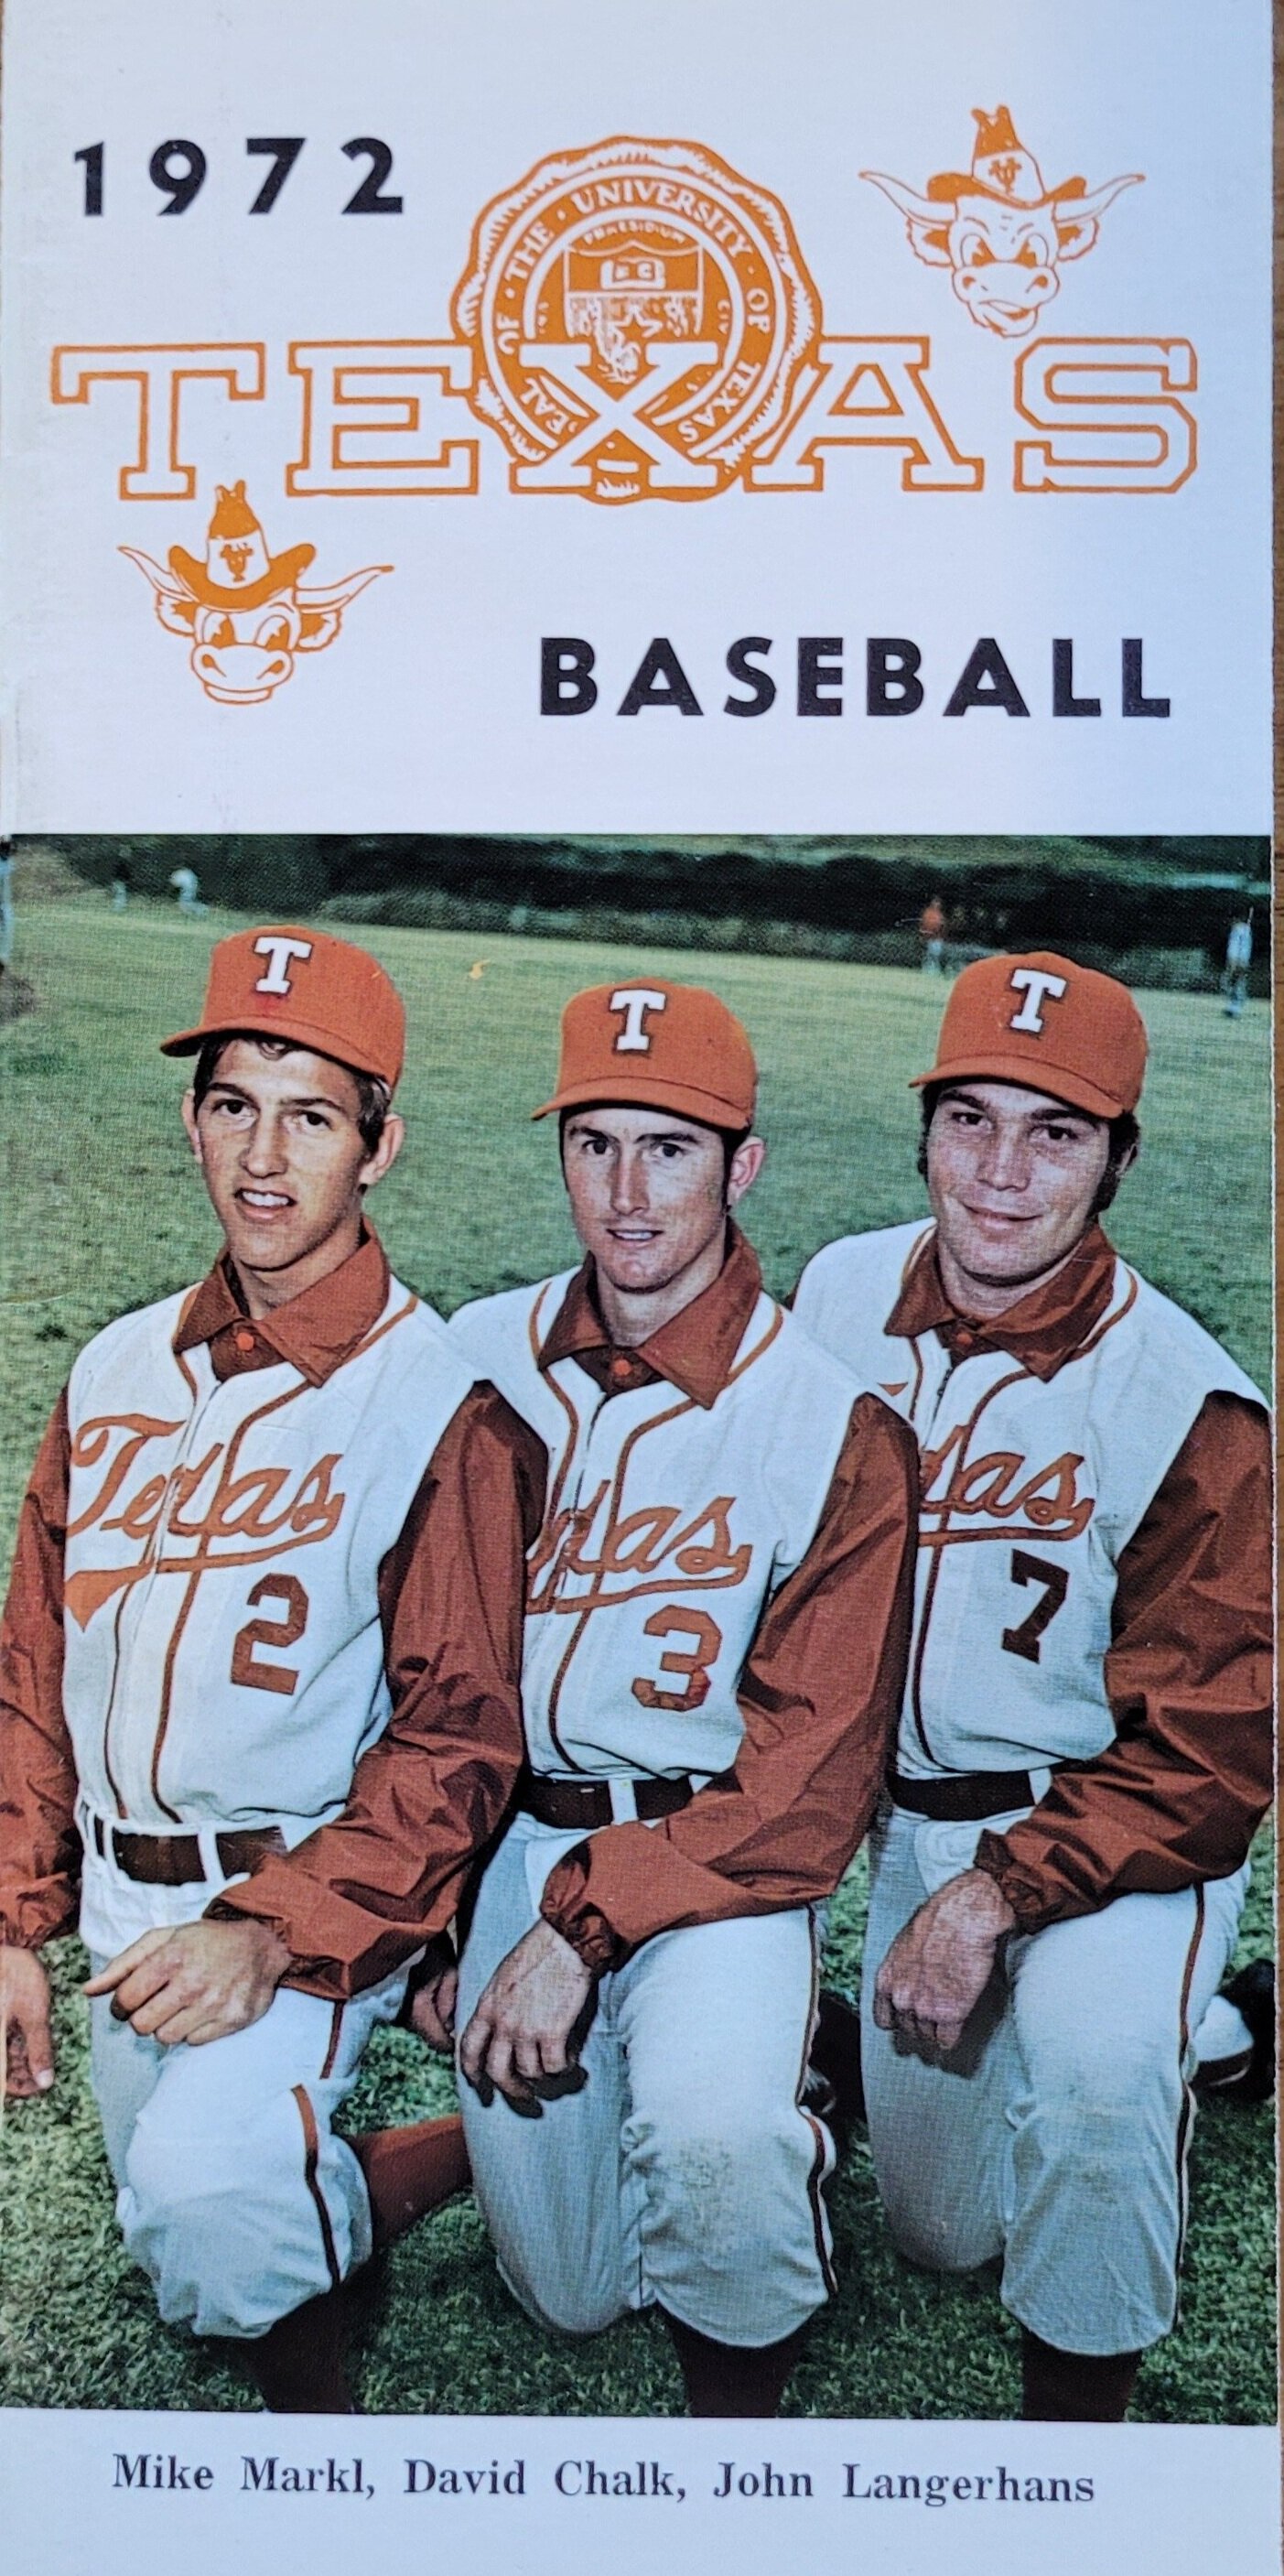  Mike Markl, David Chalk, and John Langerhans were the first three players in the modern era to play four years of baseball at Texas.  